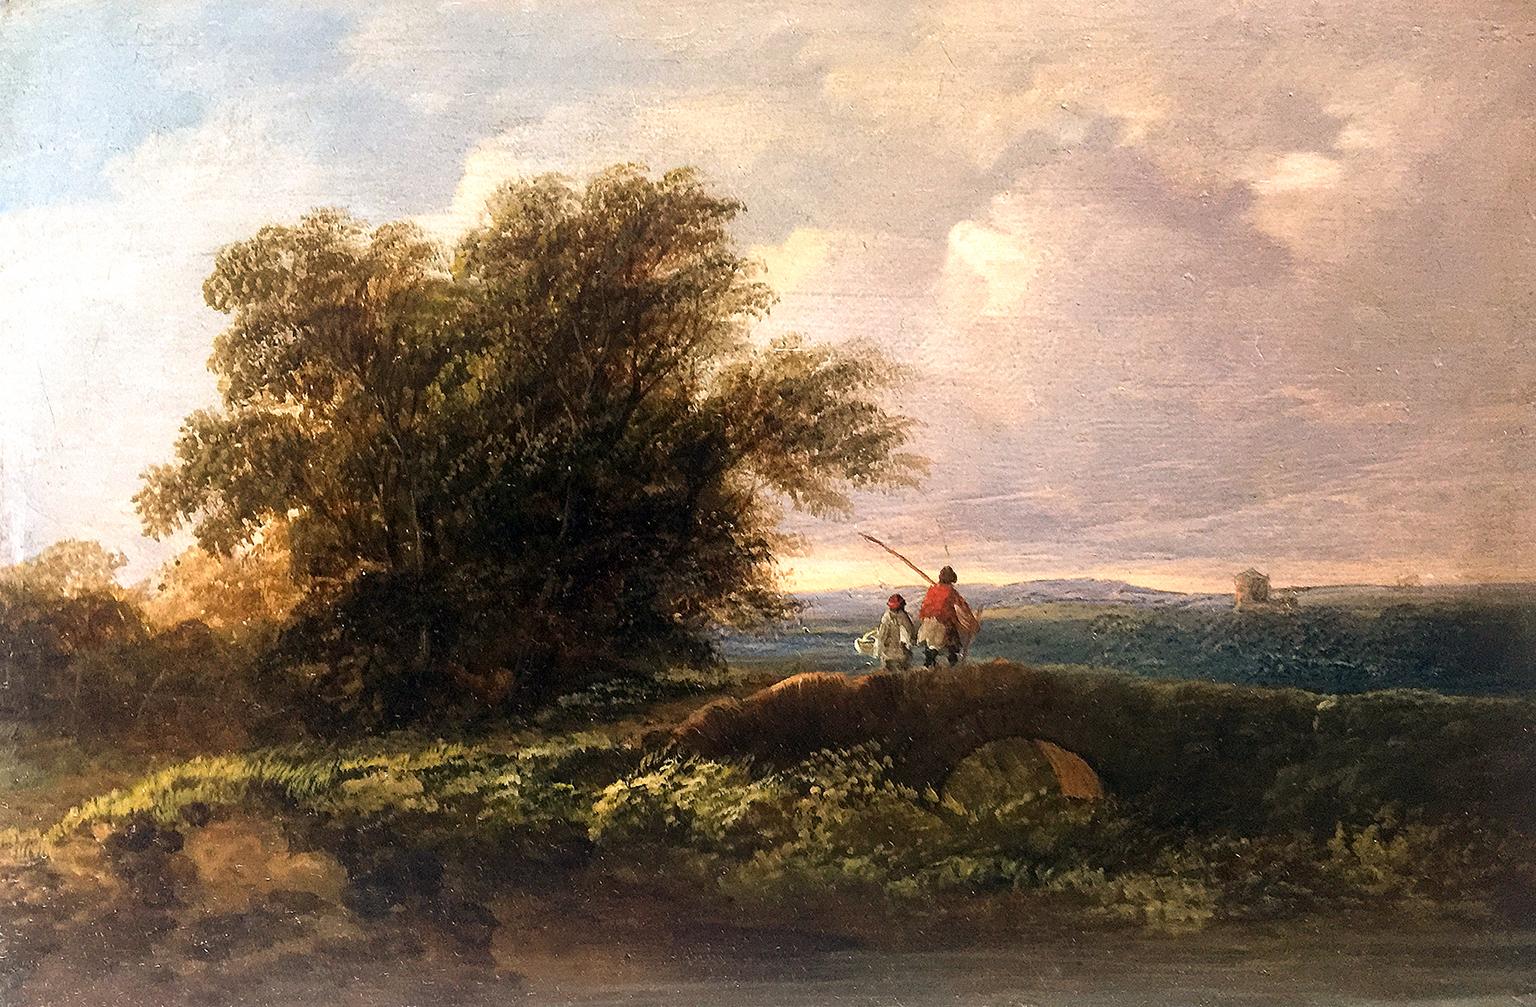 Circle of James Arthur O'Connor (1792-1841). O'Connor was one of the most respected Irish landscape artists of the early 19th century, he was often compared to John Constable as well as being dubbed the Constable of Ireland. His works are well